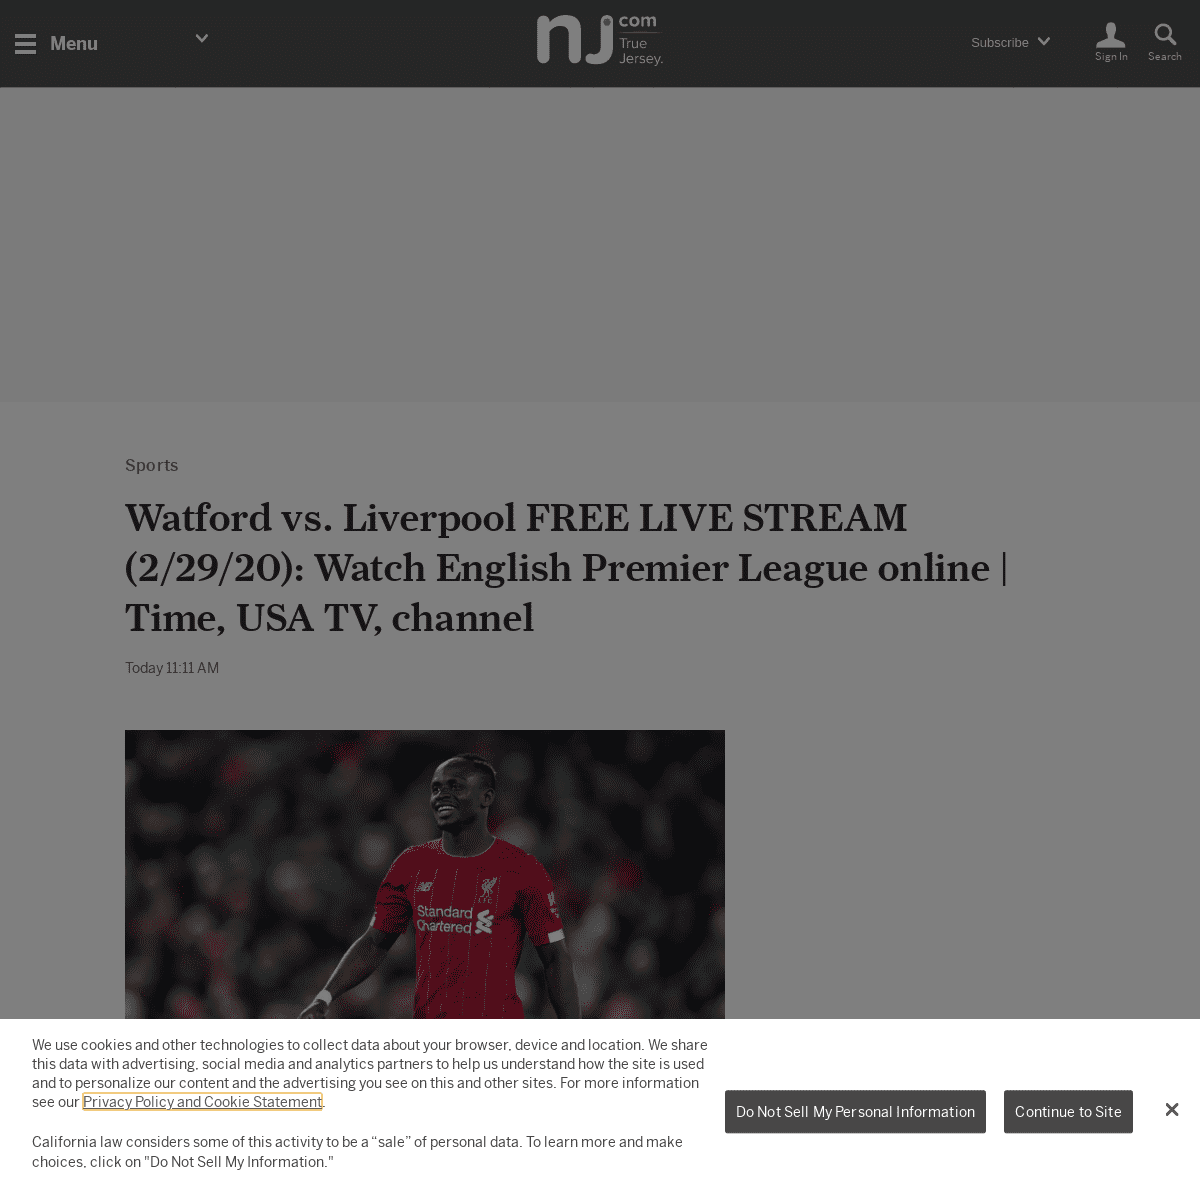 A complete backup of www.nj.com/sports/2020/02/watford-vs-liverpool-free-live-stream-22920-watch-english-premier-league-online-t